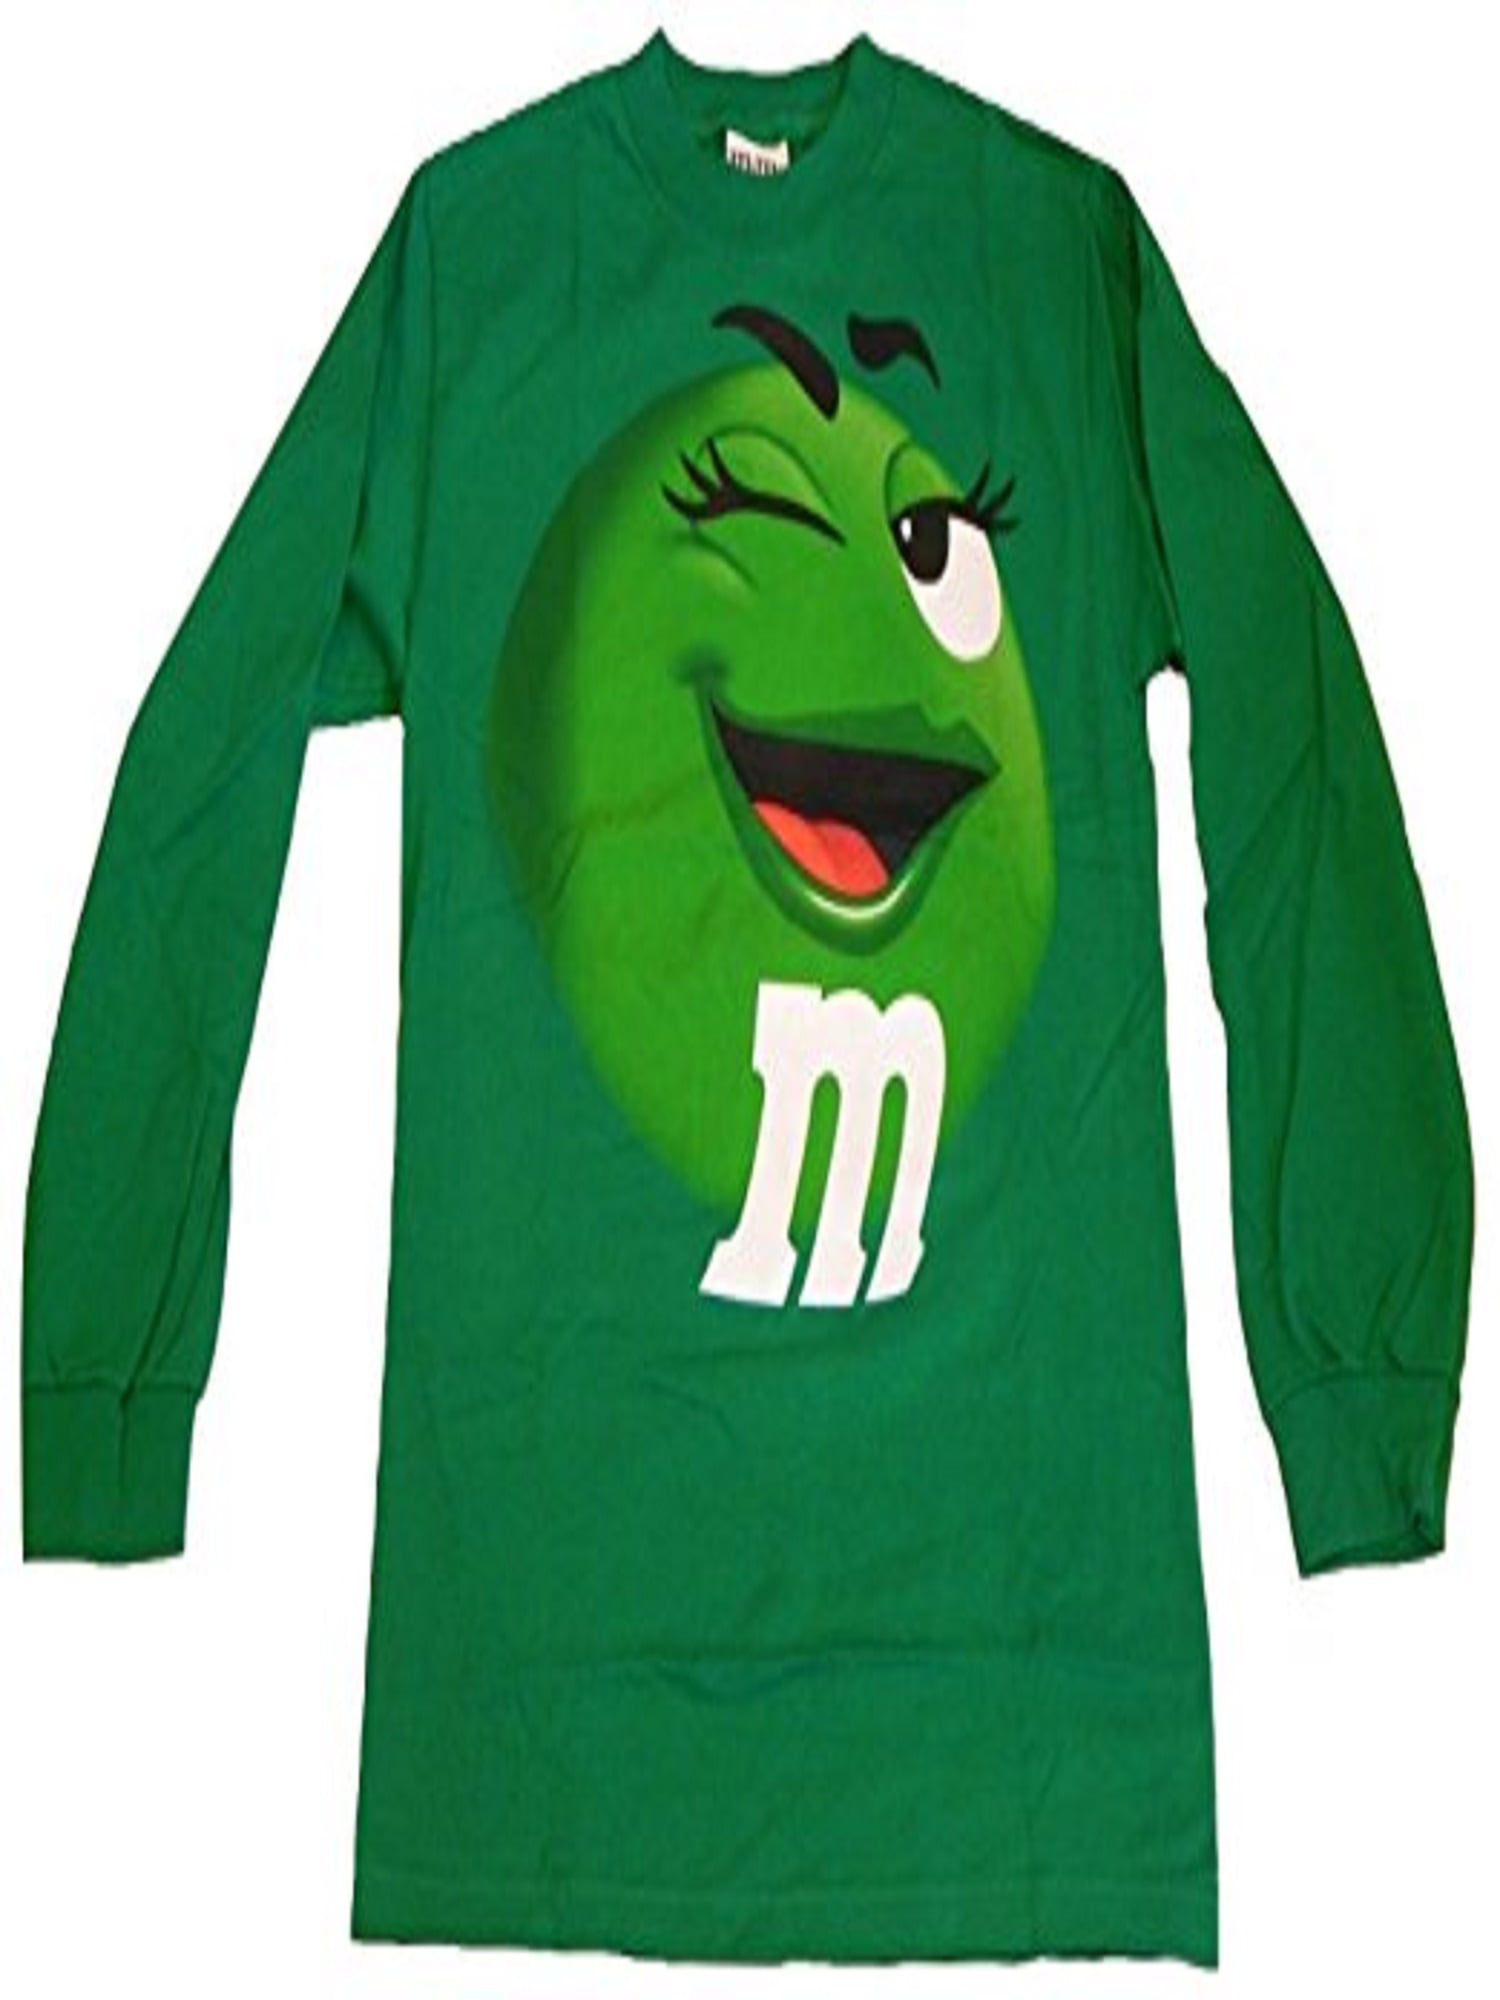 M&M M&M's Candy Silly Character Face T-Shirt (Small, Green Long Sleeve ...